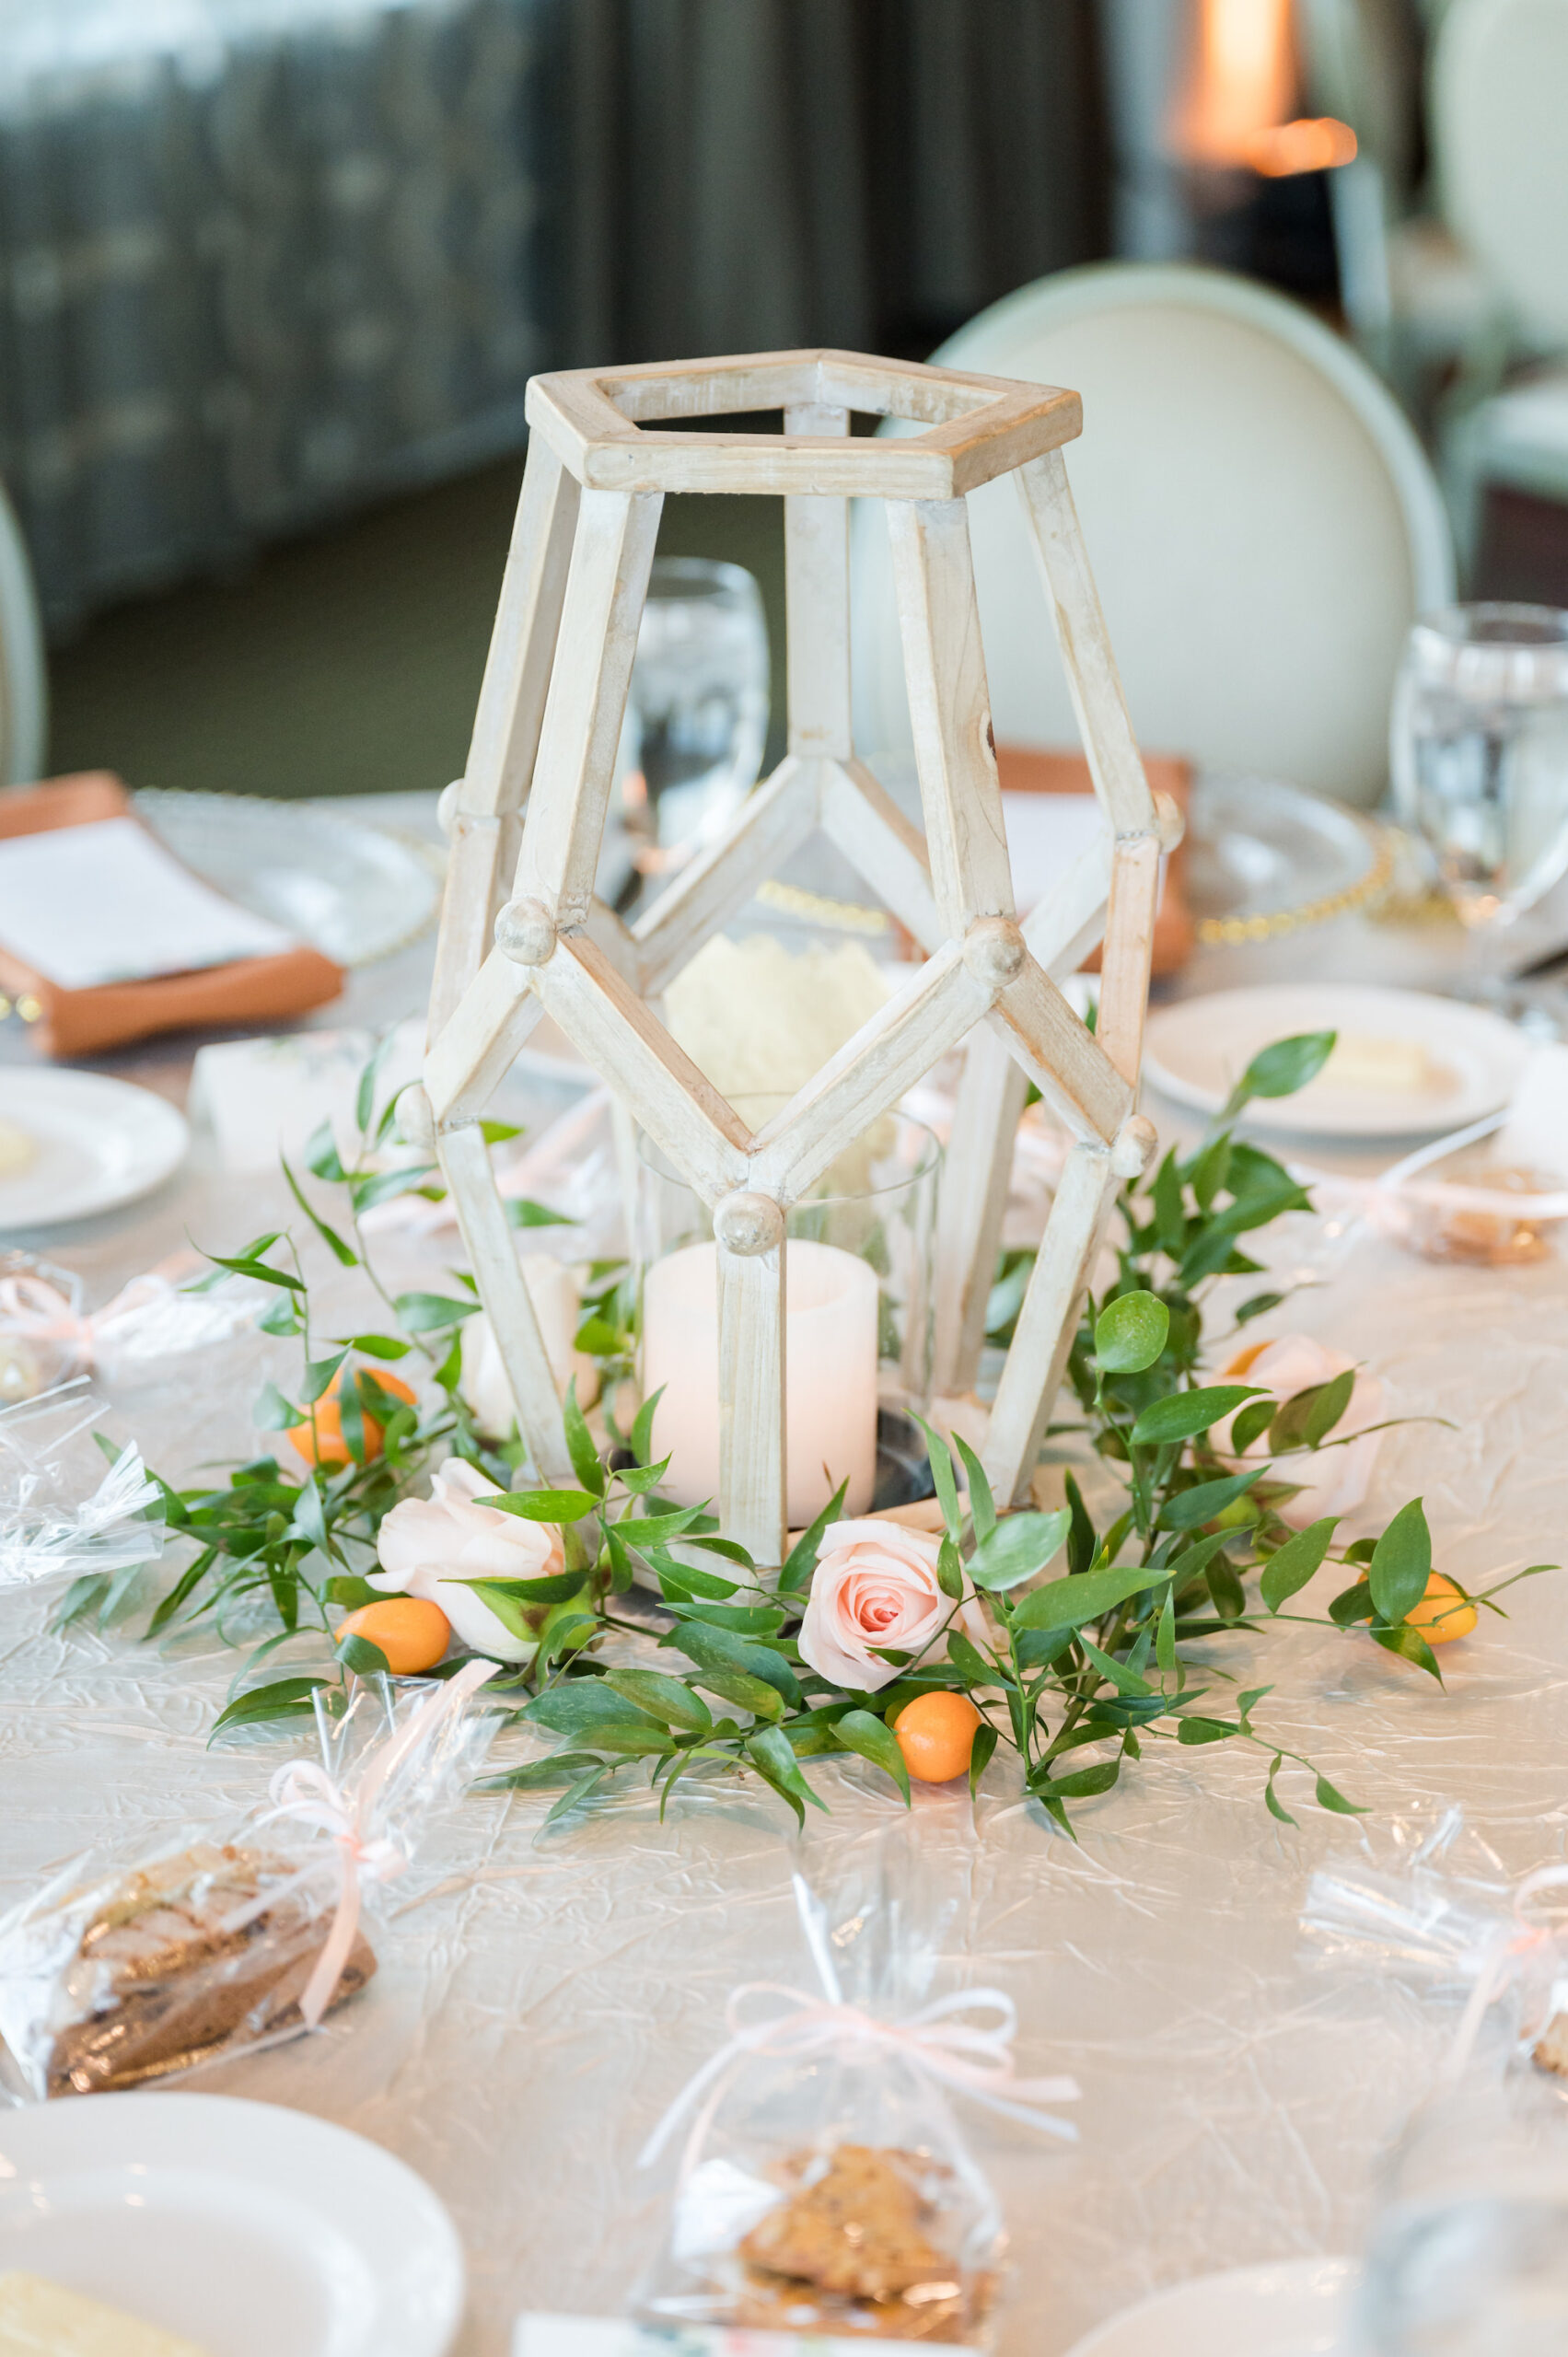 White Coastal Birchwood Candle Centerpieces with Peach, Orange, Pink Florals with Greenery Wedding Centerpieces